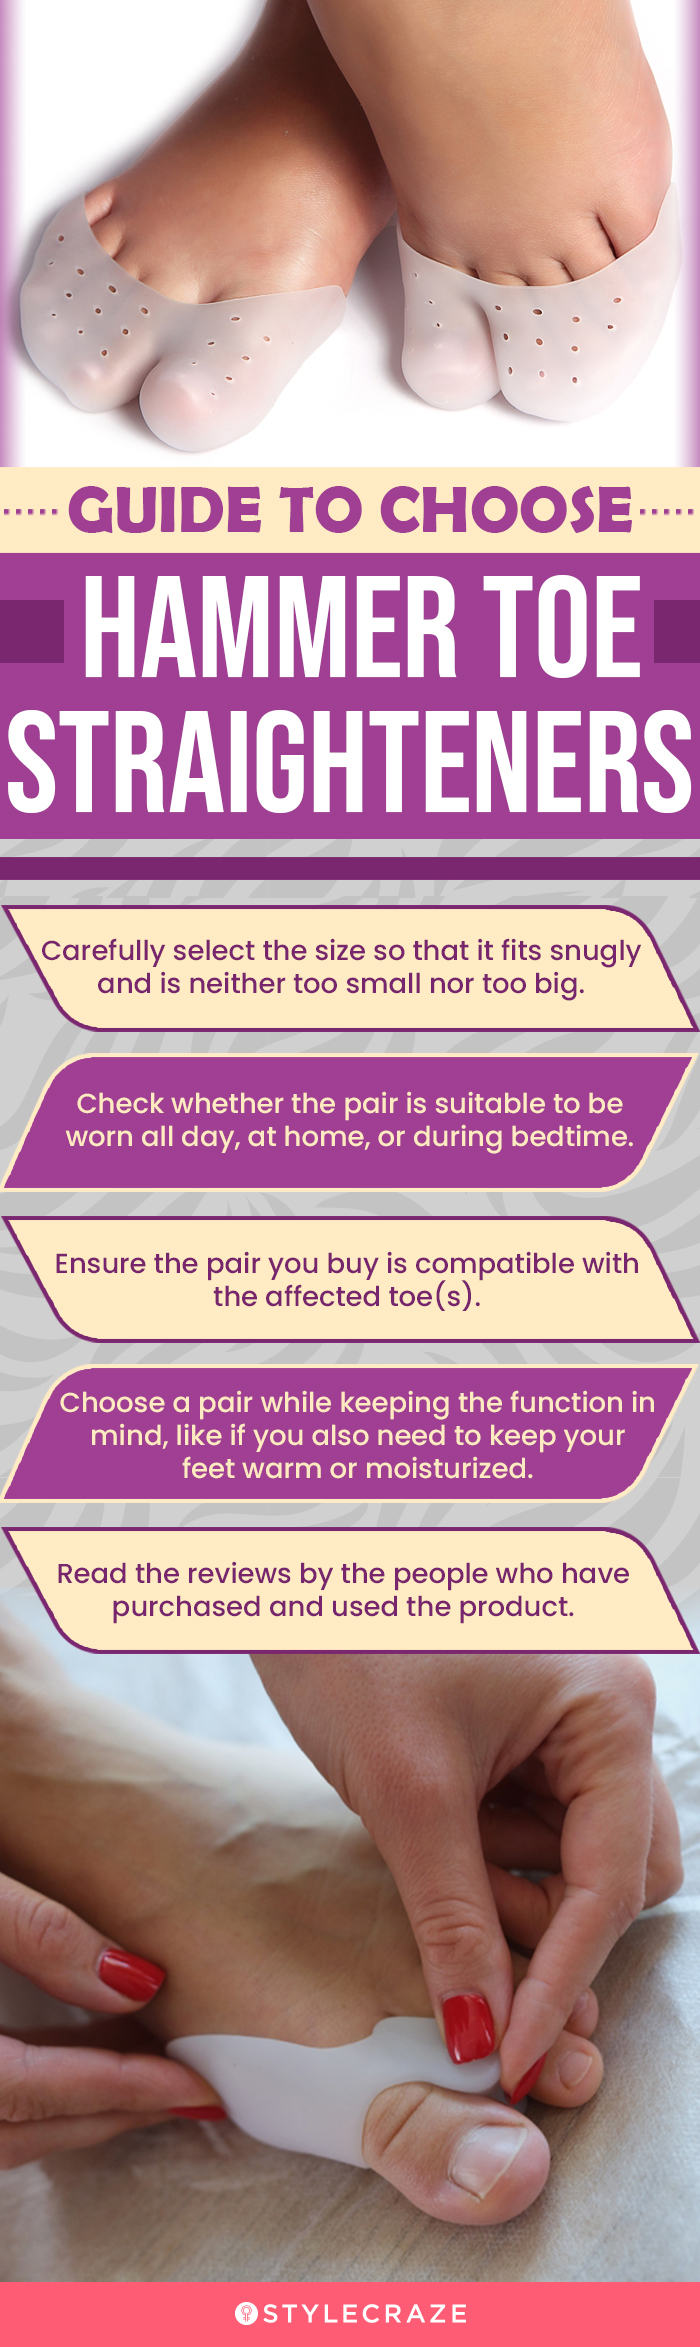 Guide To Choose Hammer Toe Straighteners (infographic)